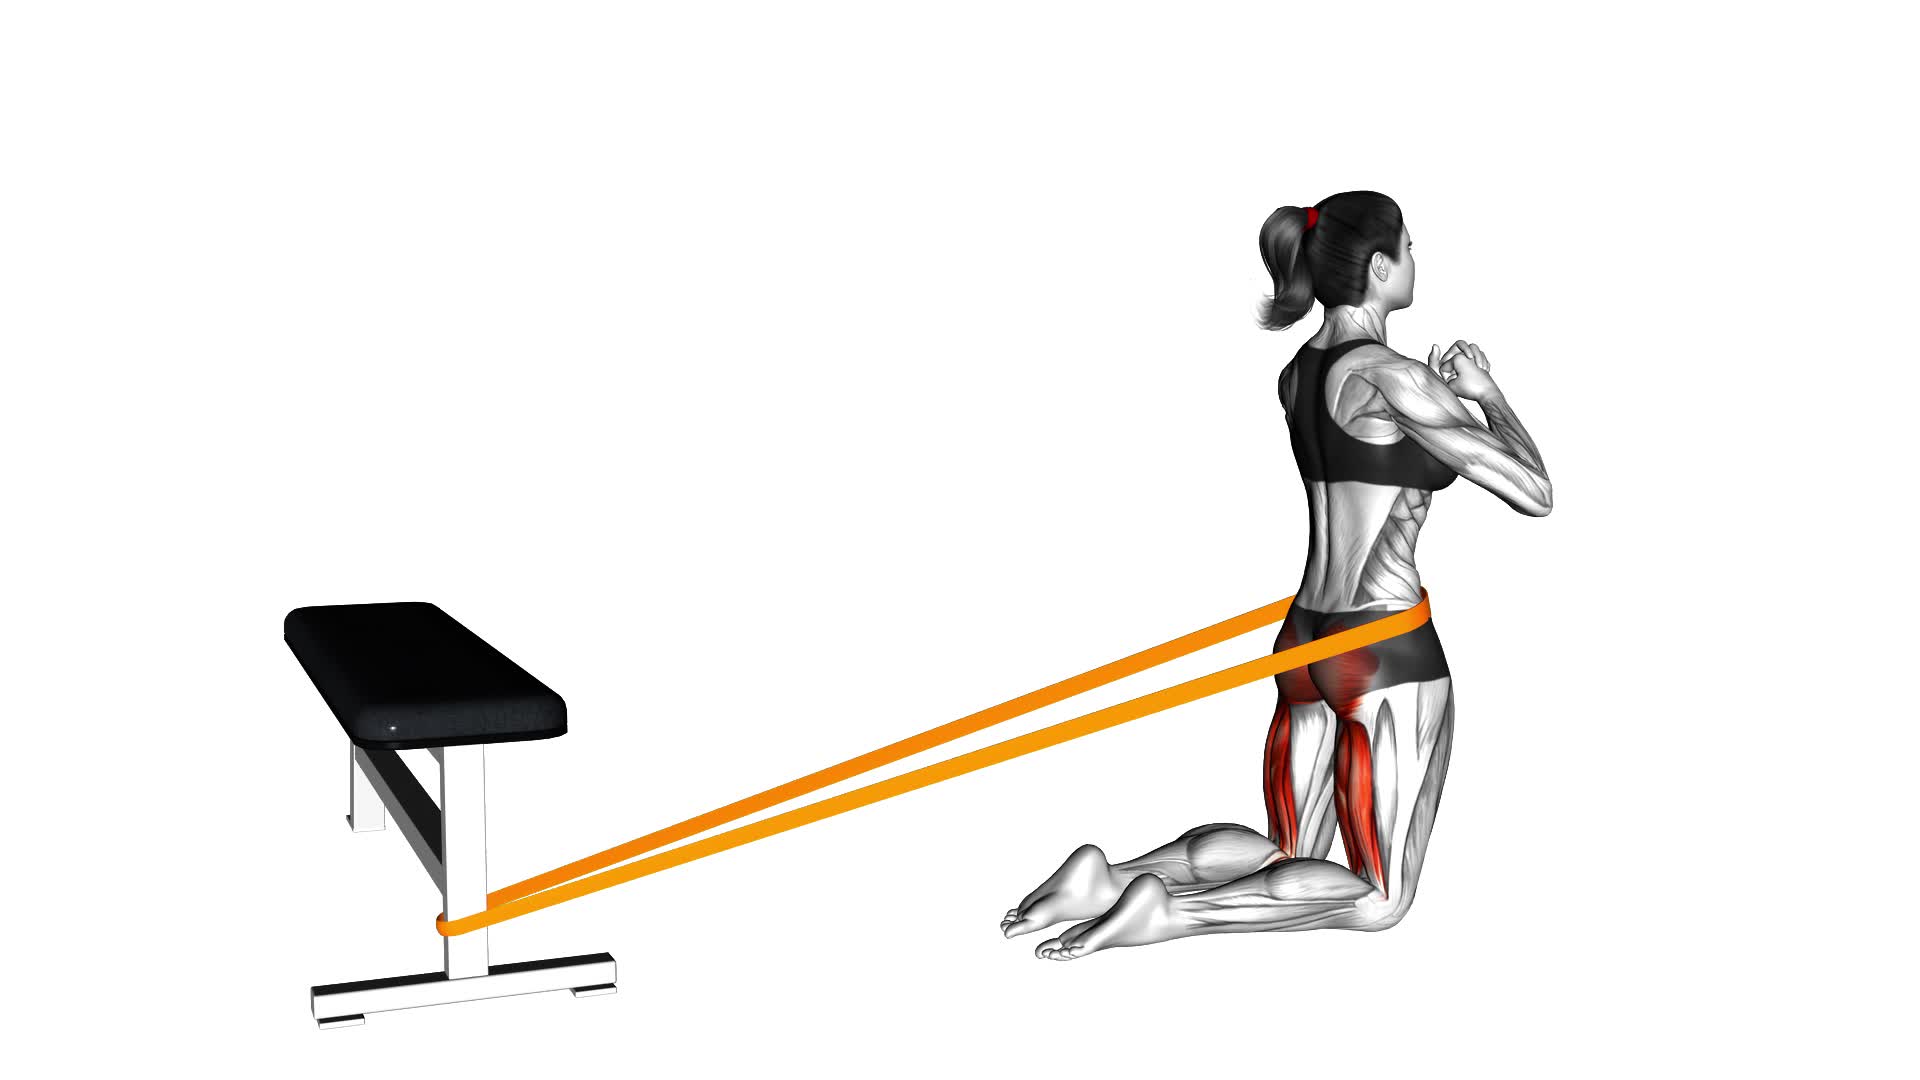 Resistance Band Hip Thrusts on Knees (female) - Video Exercise Guide & Tips